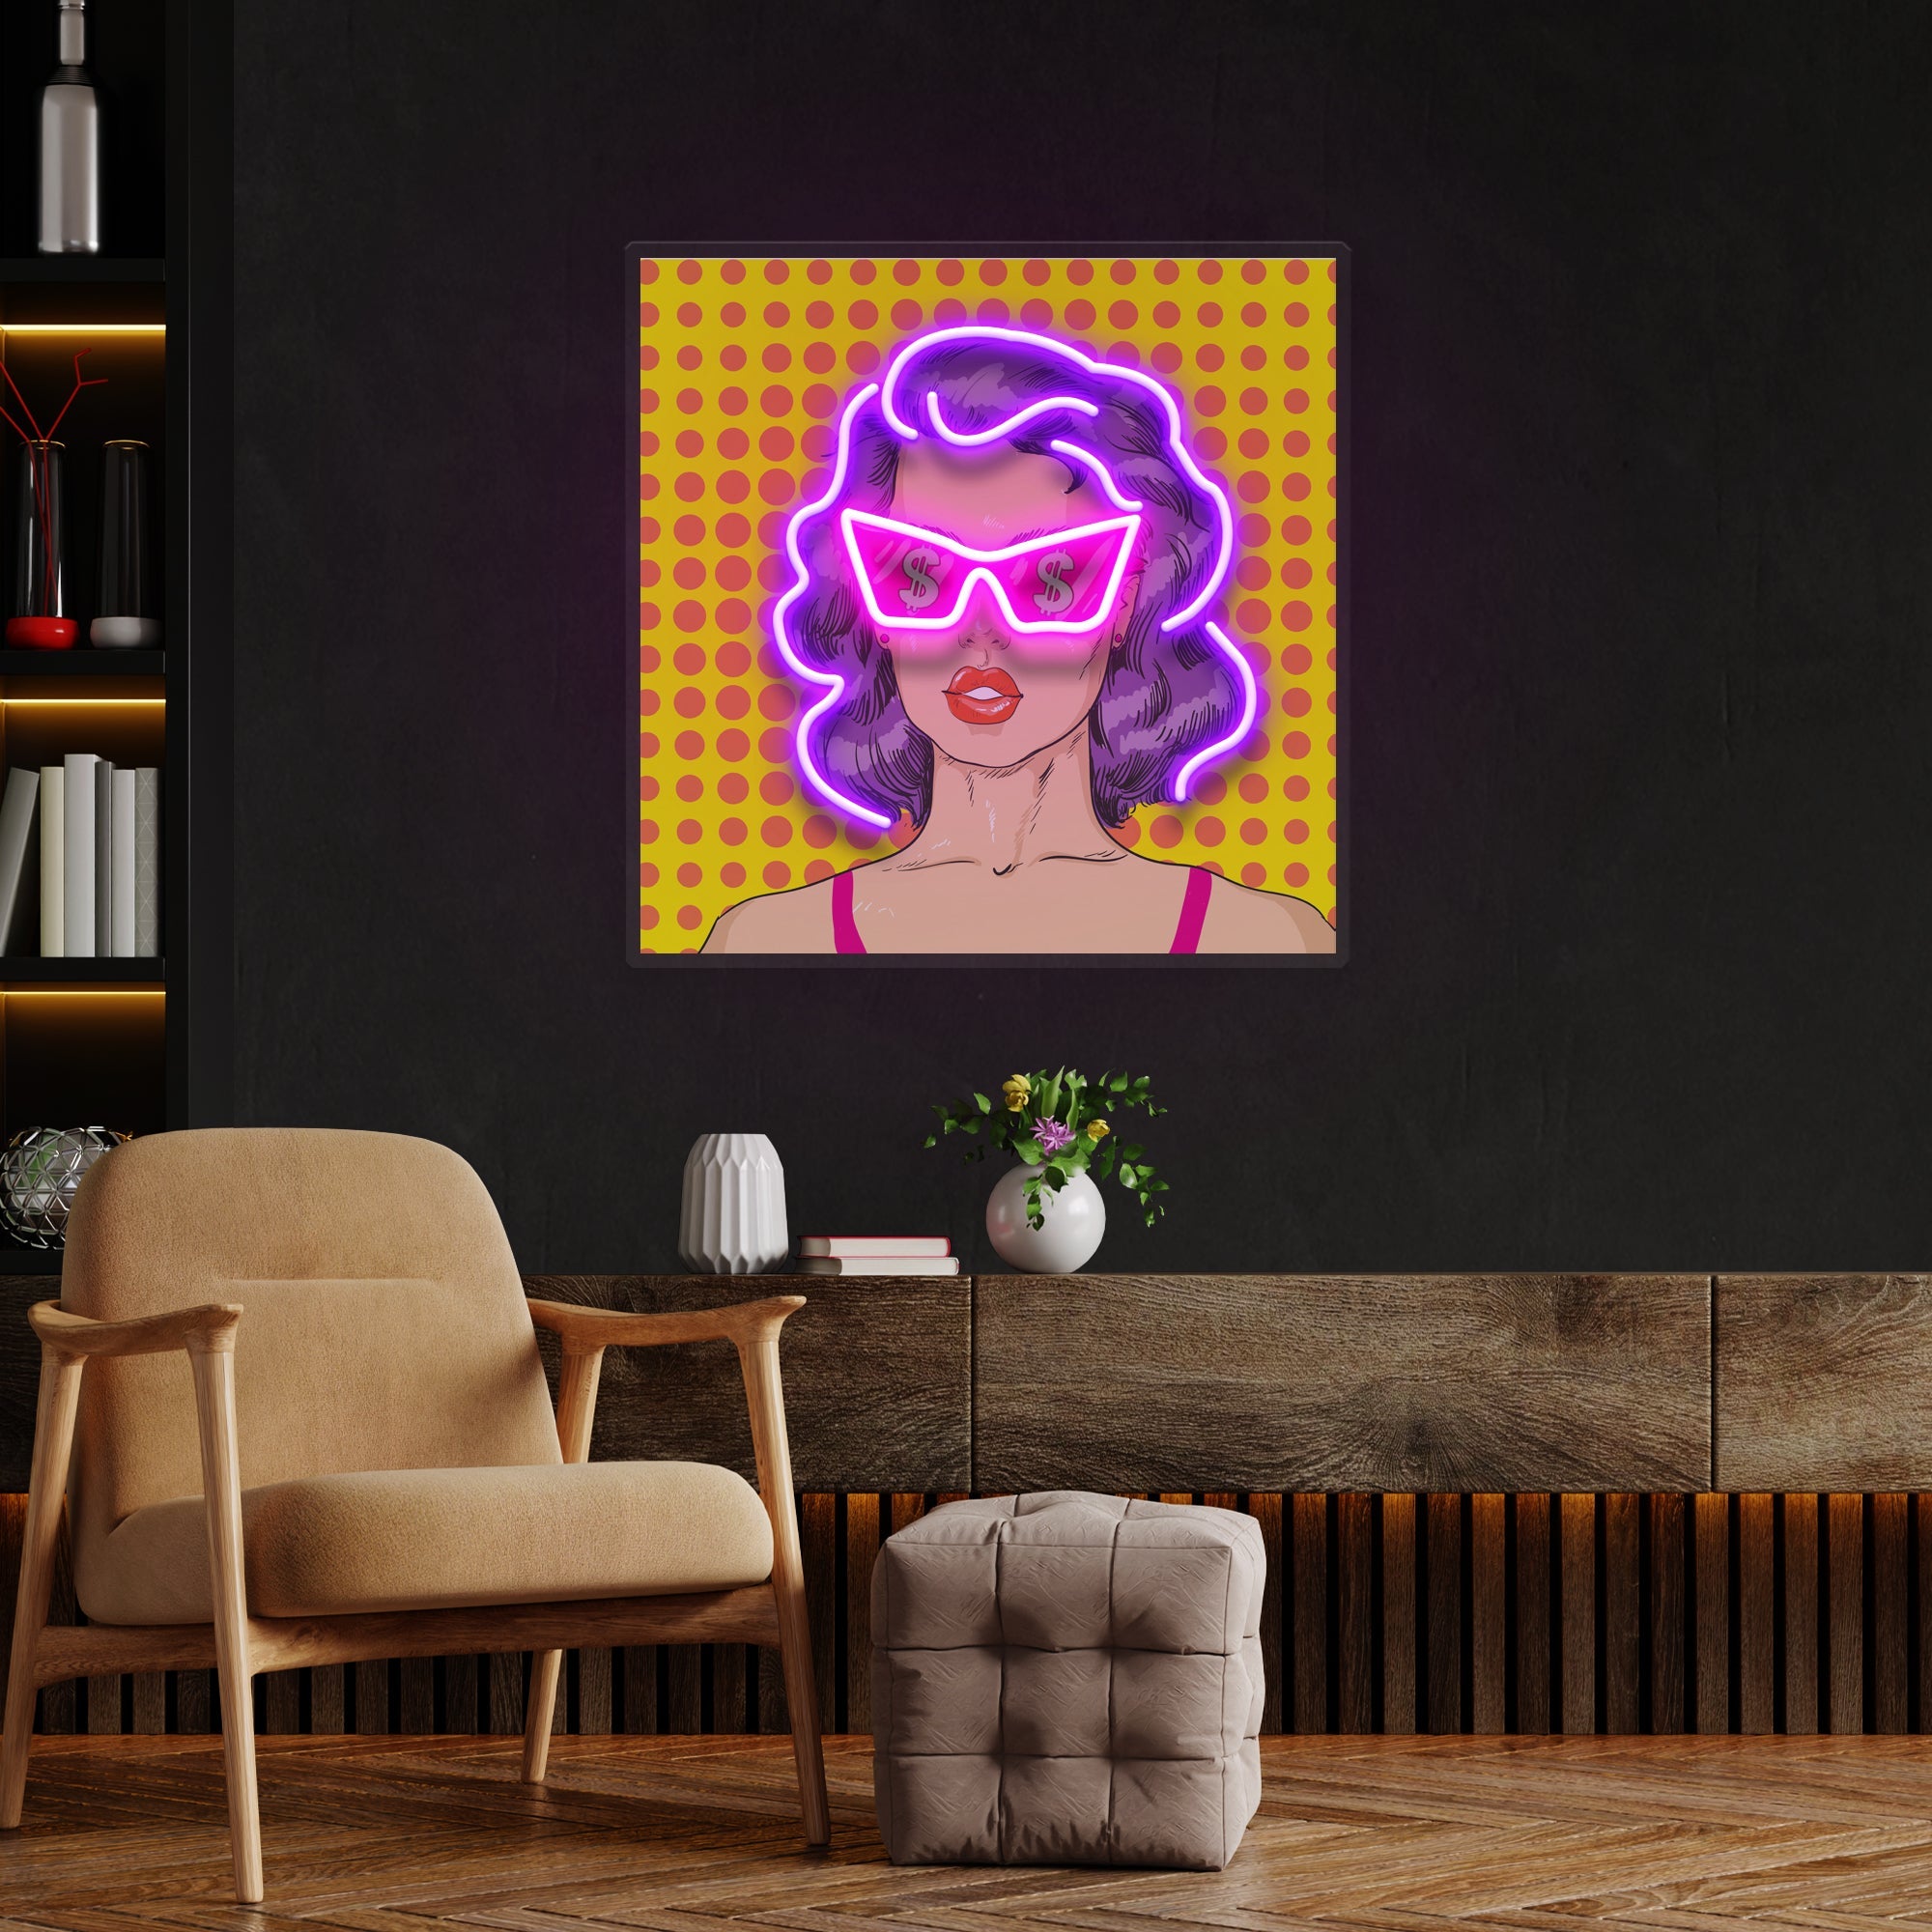 Woman In Pink Sunglasses With Dollar In Retro Pop Art Led Neon Sign Light - Neonbir